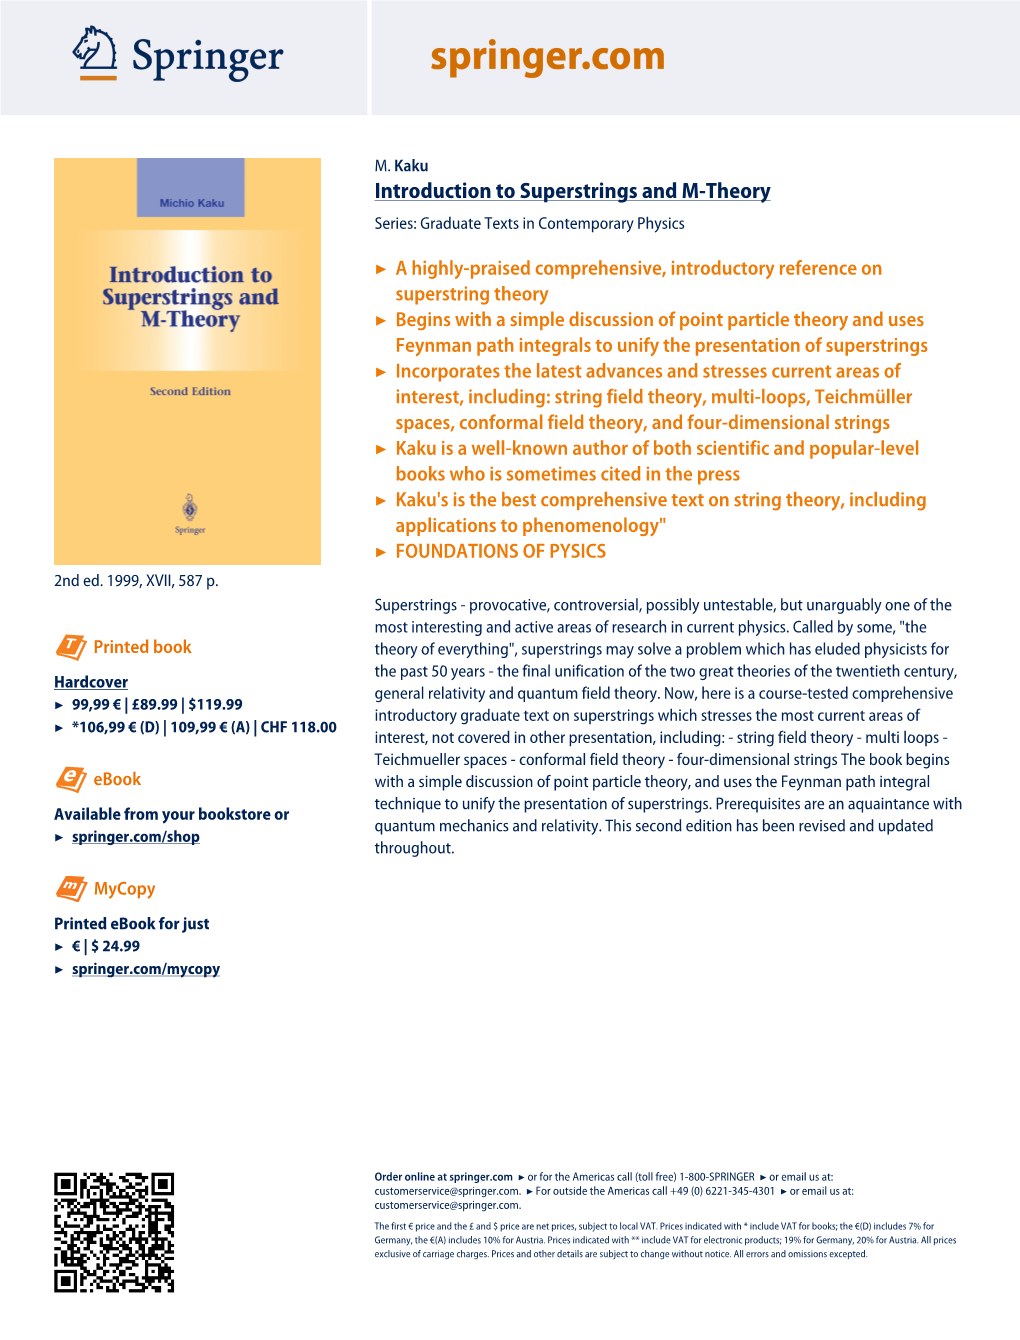 Introduction to Superstrings and M-Theory Series: Graduate Texts in Contemporary Physics